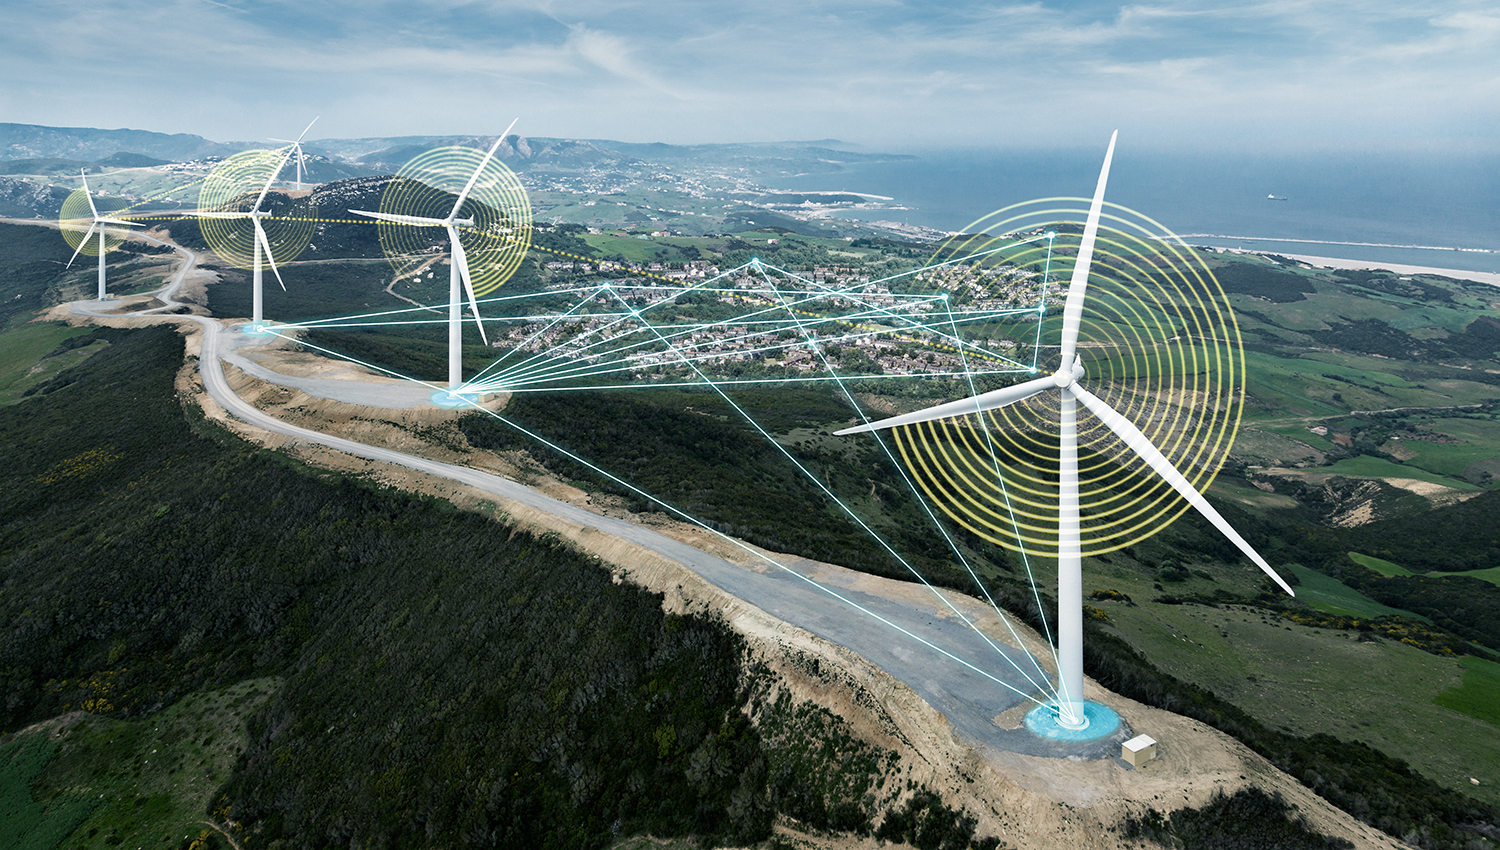 Four wind turbines on hills above city with digital overlay and ocean in background.